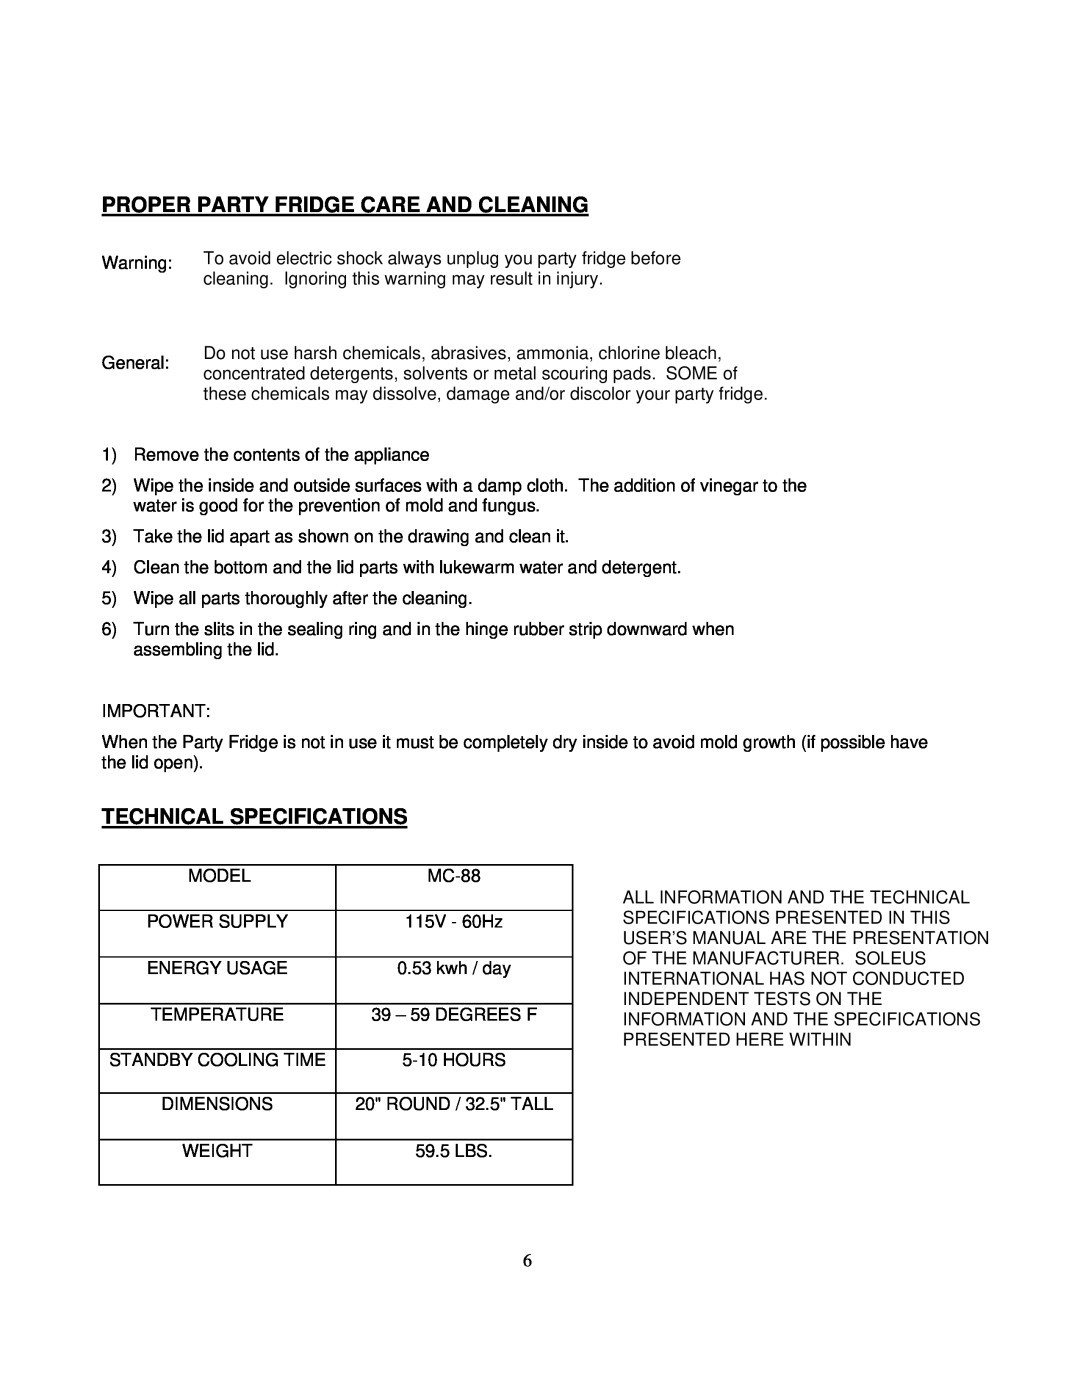 Soleus Air MC-88 owner manual Proper Party Fridge Care And Cleaning, Technical Specifications 